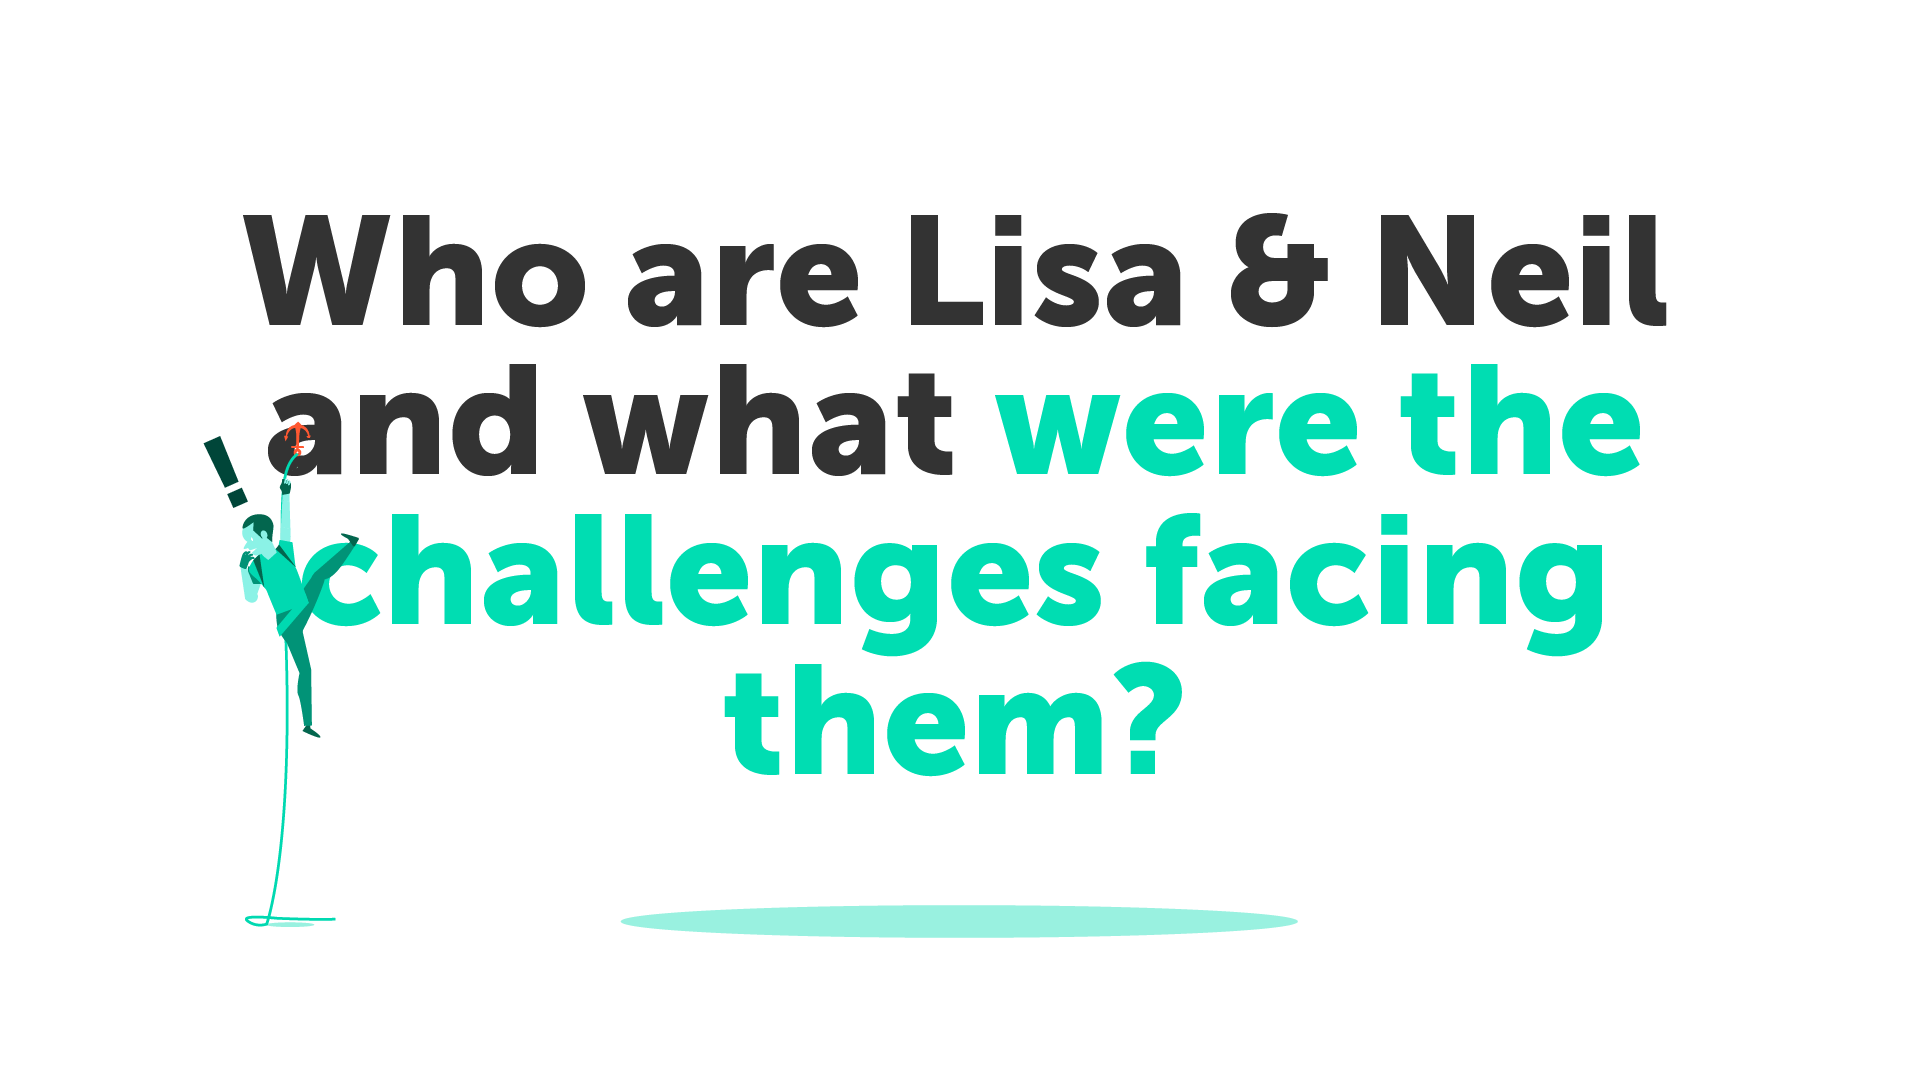 Who are Lisa & Neil and what were the challenges facing them?